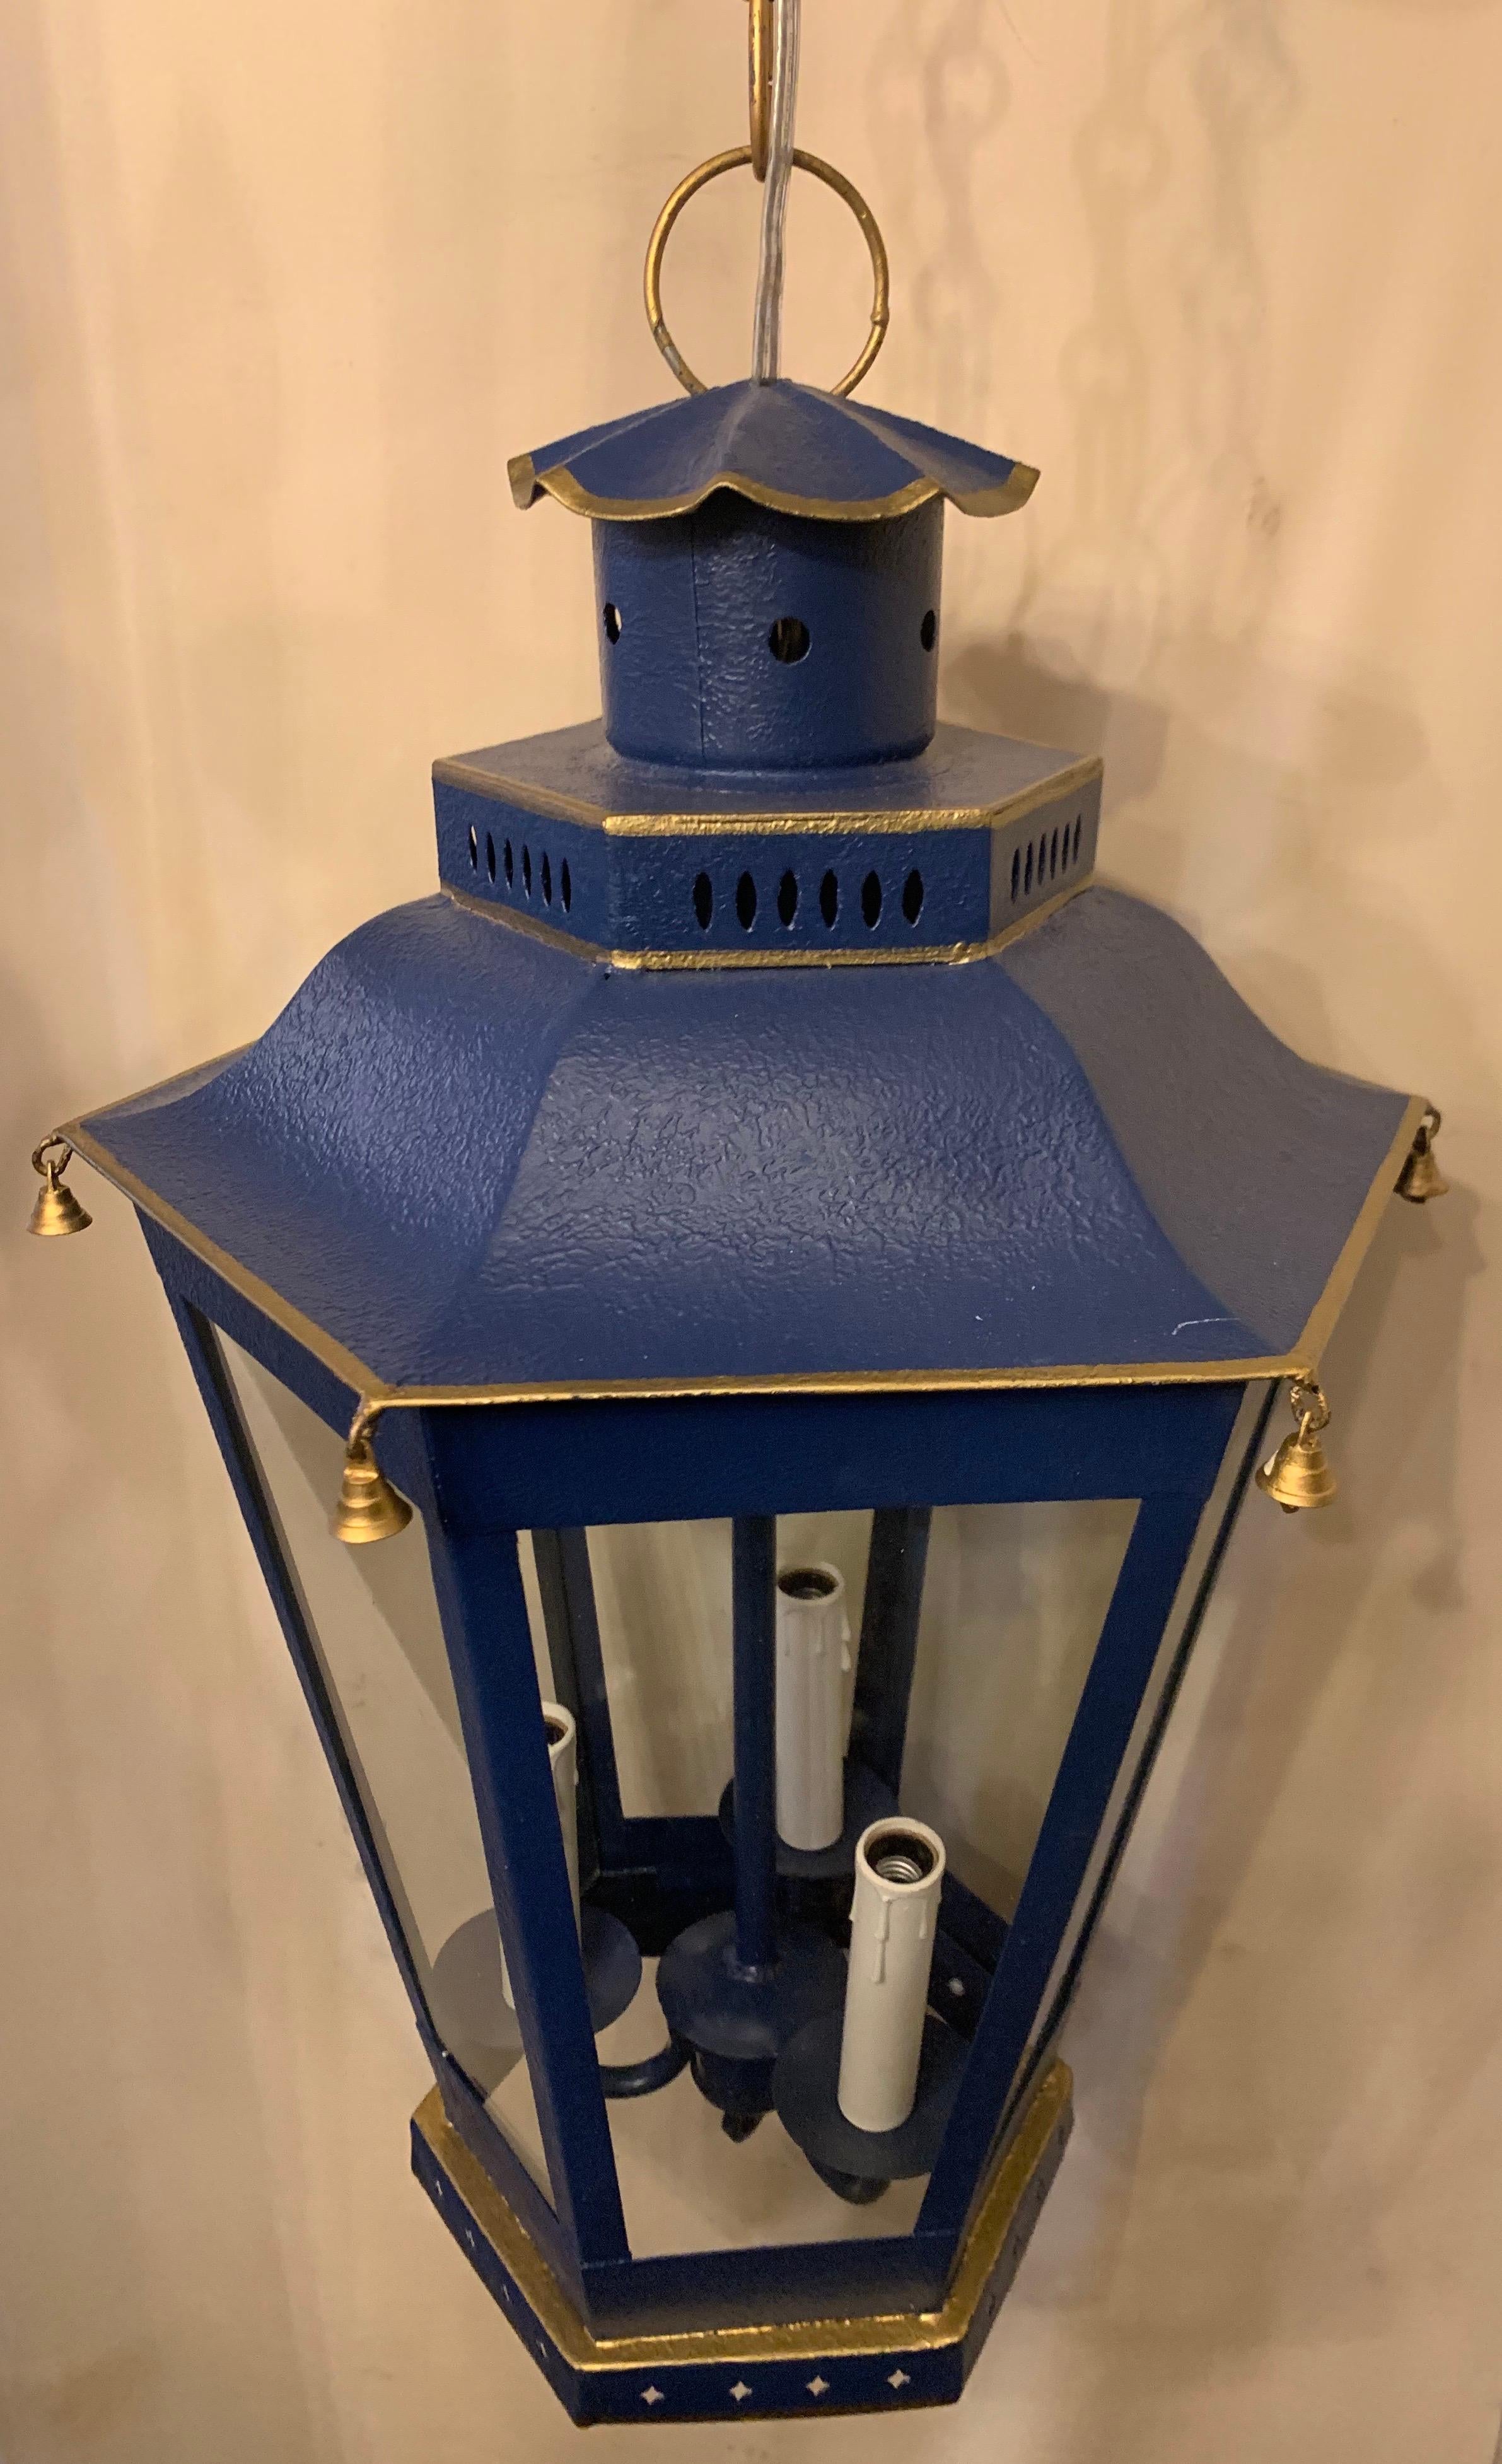 A wonderful navy blue and gold gilt trim pagoda hexagon form glass panel 3 light lantern chinoiserie fixture rewired and ready to install with chain canopy and mounting hardware.